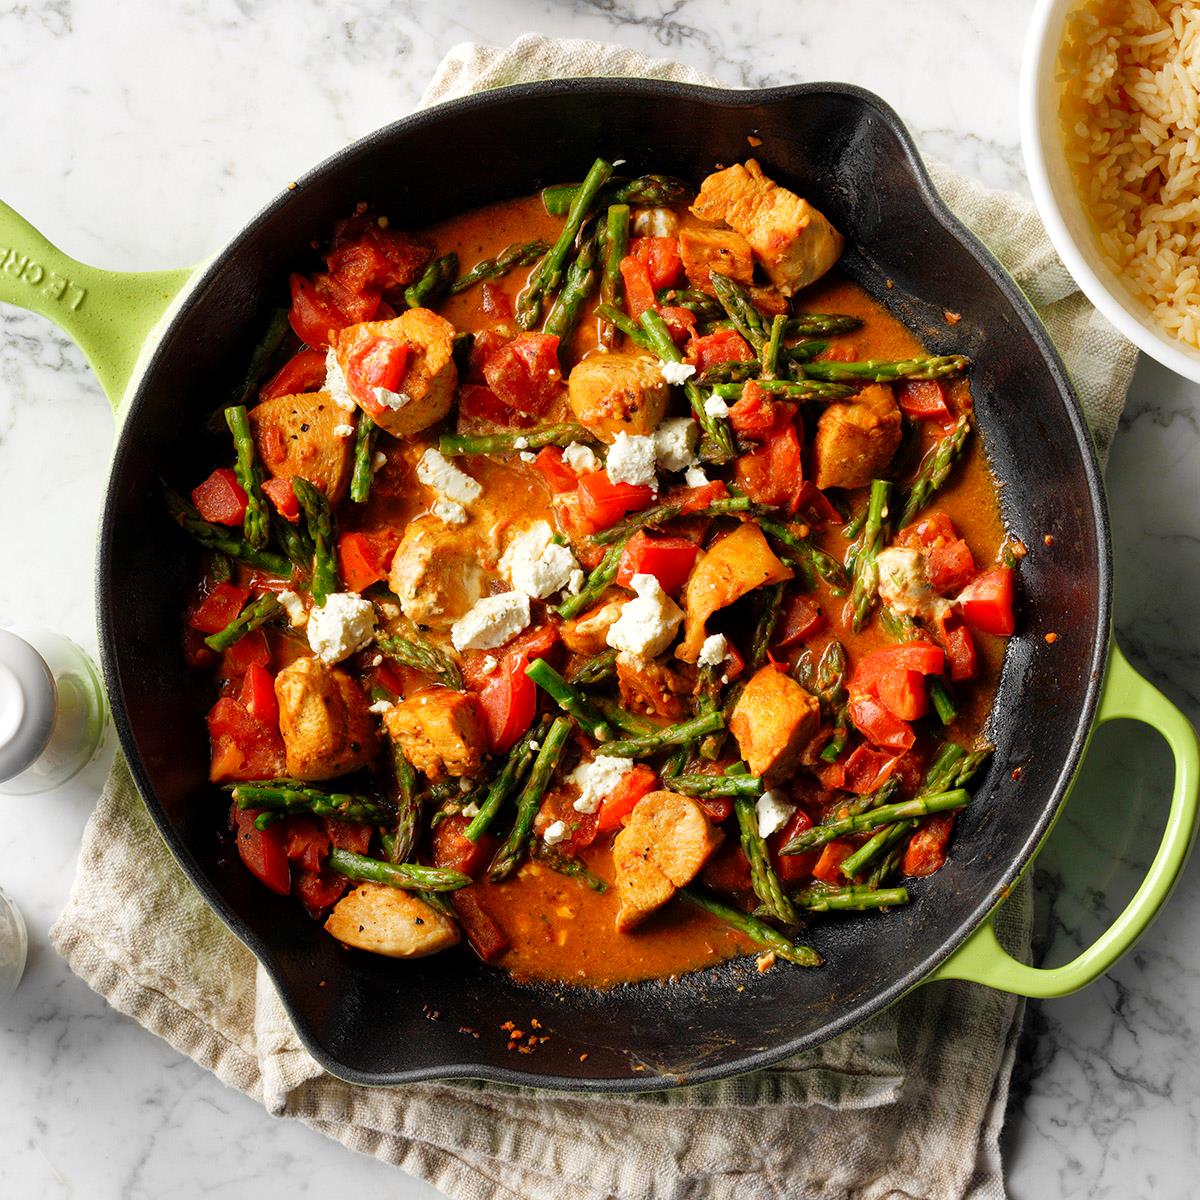 Top-down of a cast iron skillet with chicken, goat cheese, tomato, and asparagus in a red sauce